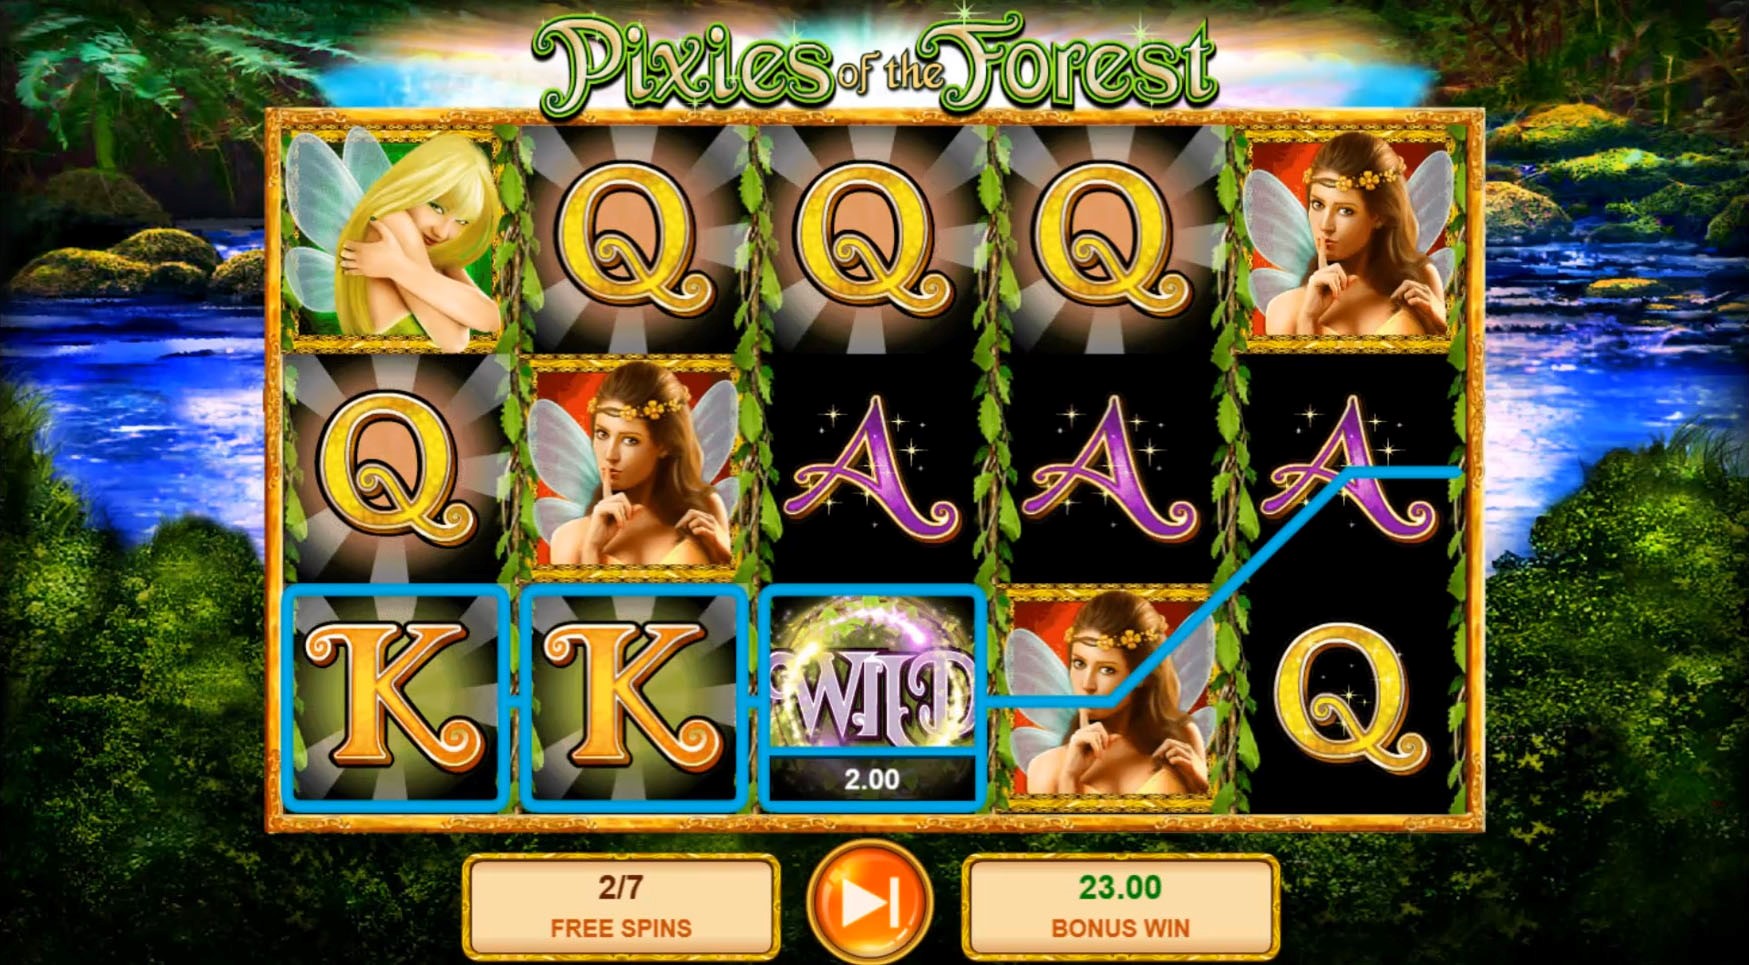 A Free Spins bonus game win is awarded during the Pixies of the Forest slot game